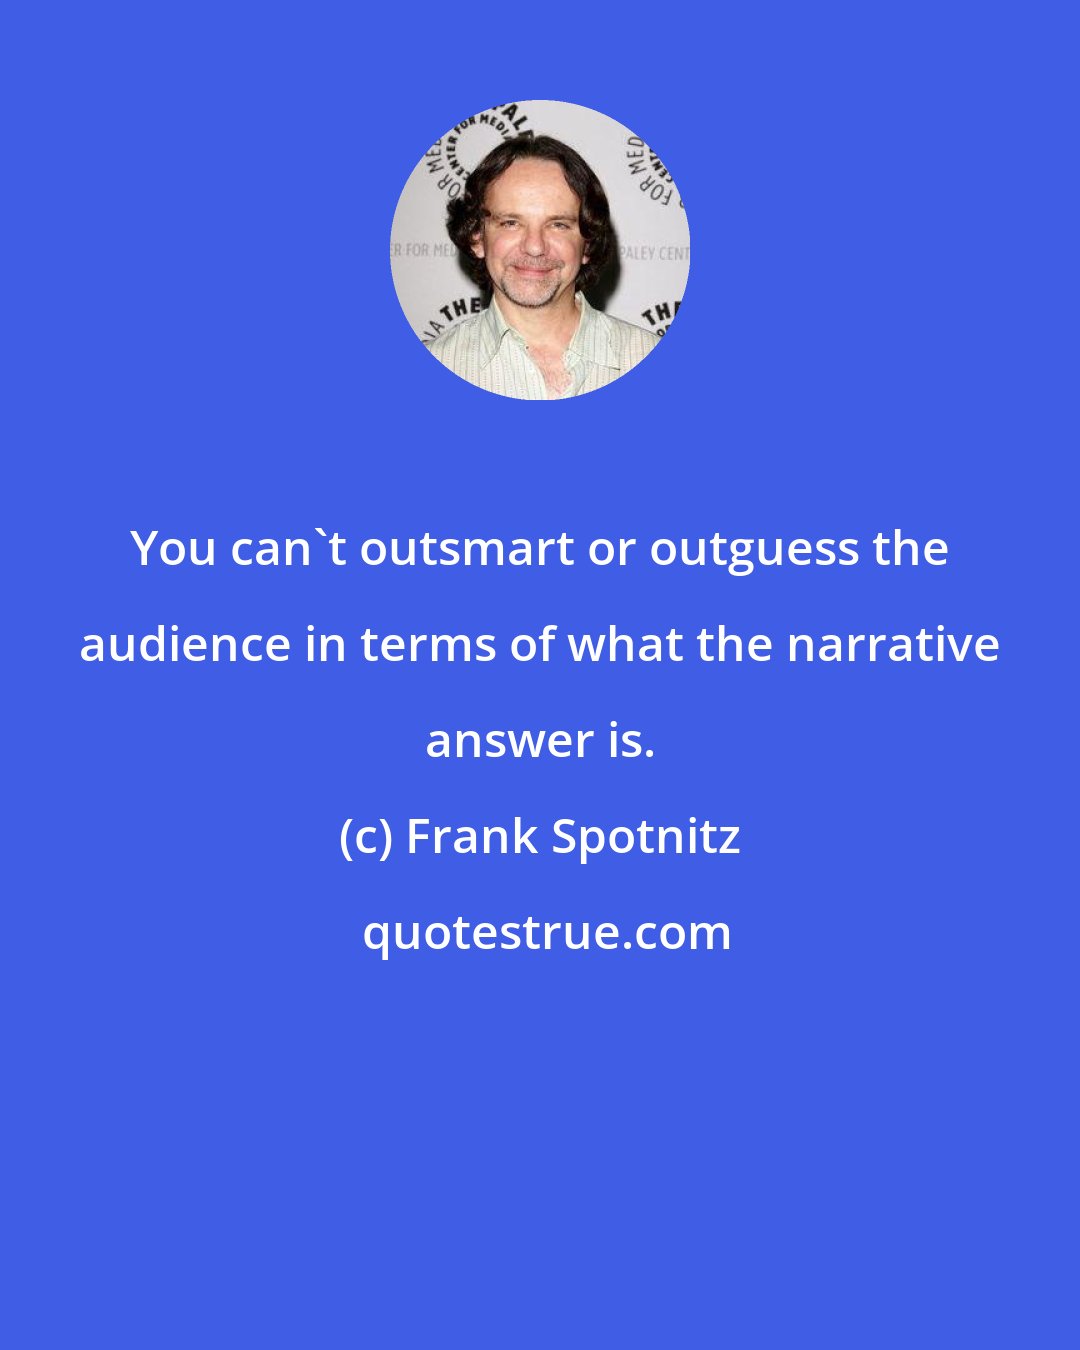 Frank Spotnitz: You can't outsmart or outguess the audience in terms of what the narrative answer is.